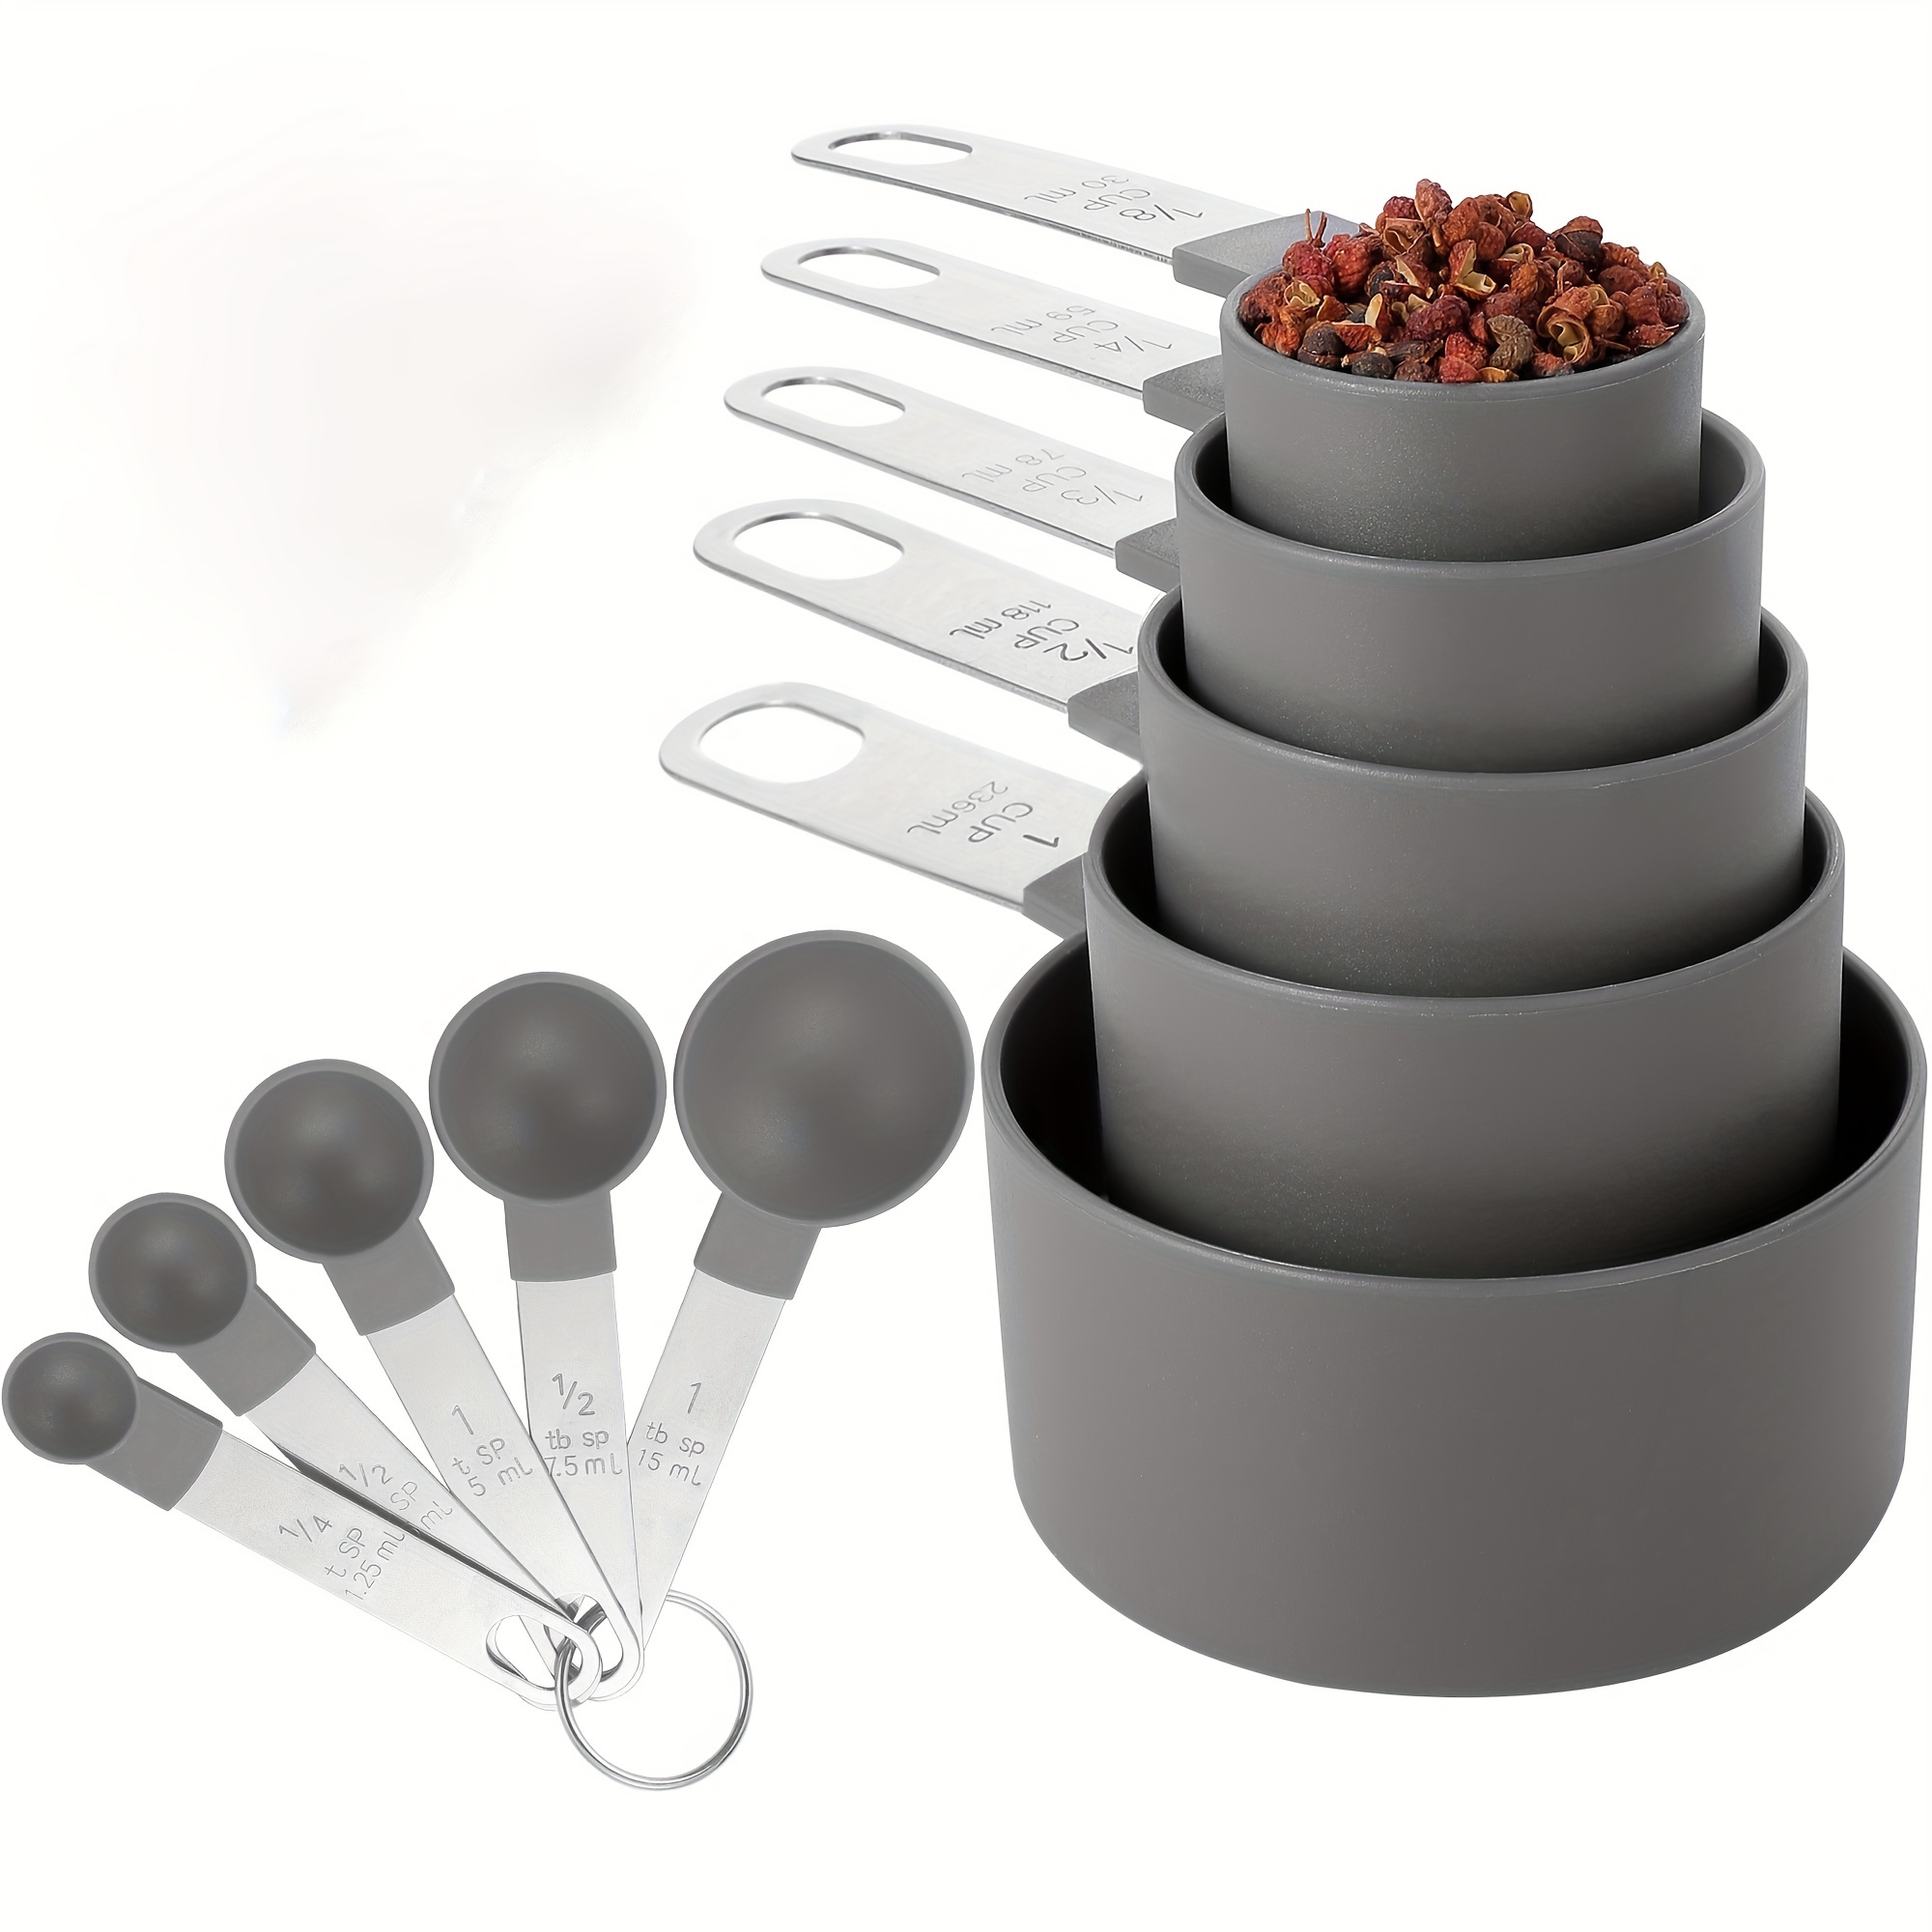 Measuring Cups And Spoons Set, 8 Piece Stackable Stainless Steel Handle  Accurate Tablespoon For Measuring Dry And Liquid Ingredients Small Teaspoon  Wi